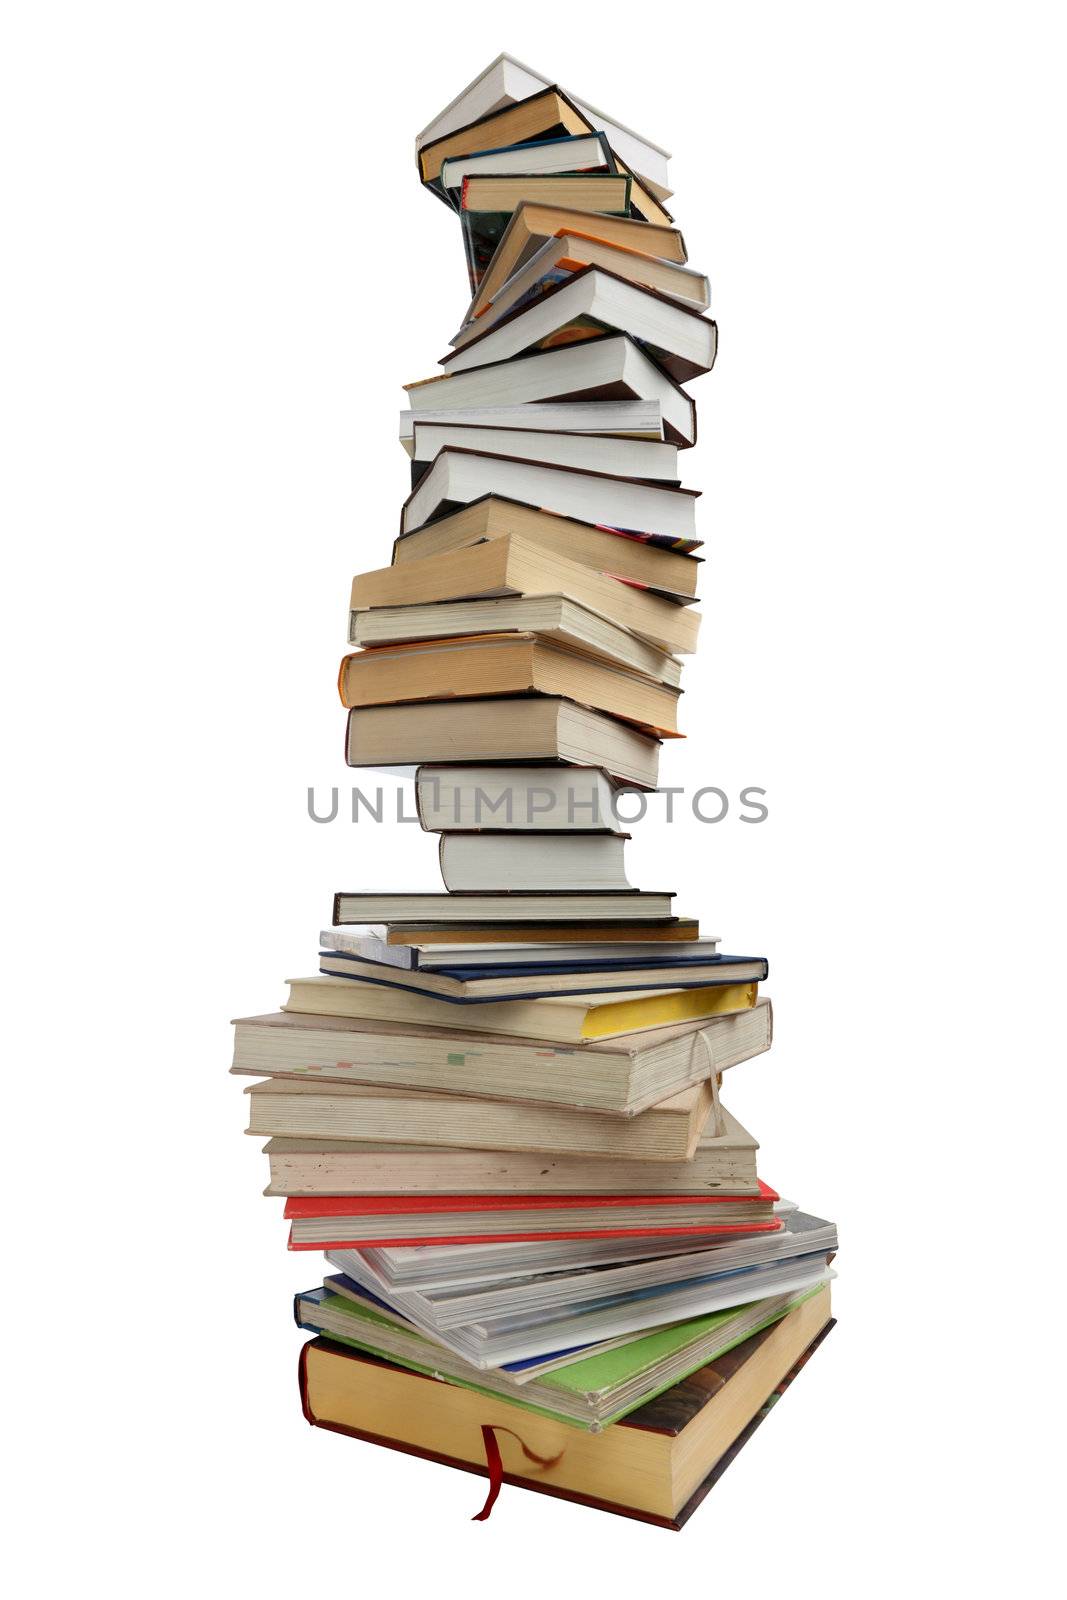 Stack of different books on a white background